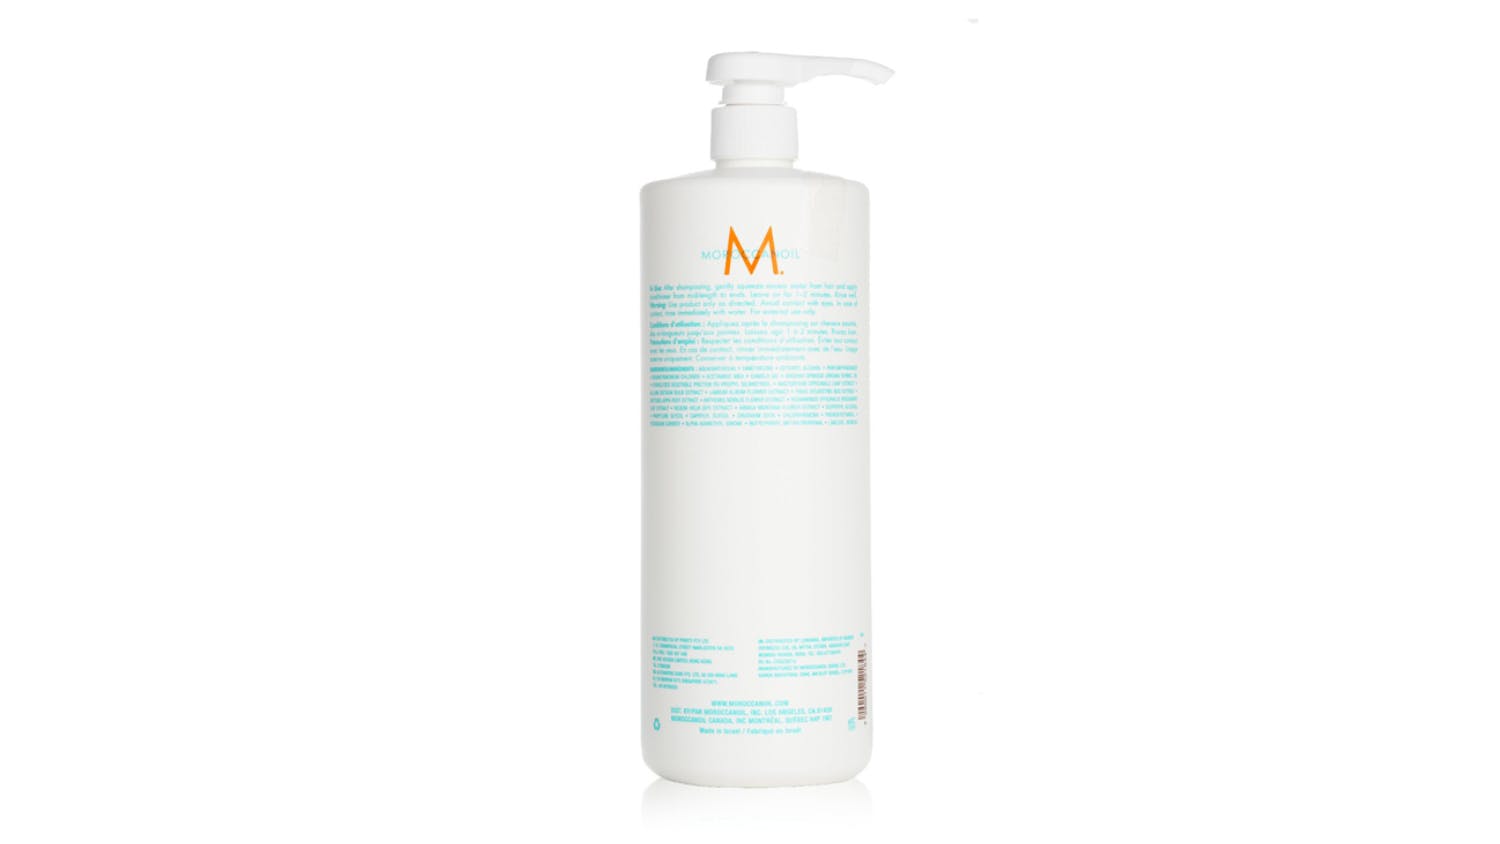 Moroccanoil Hydrating Conditioner (For All Hair Types) - 1000ml/33.8oz